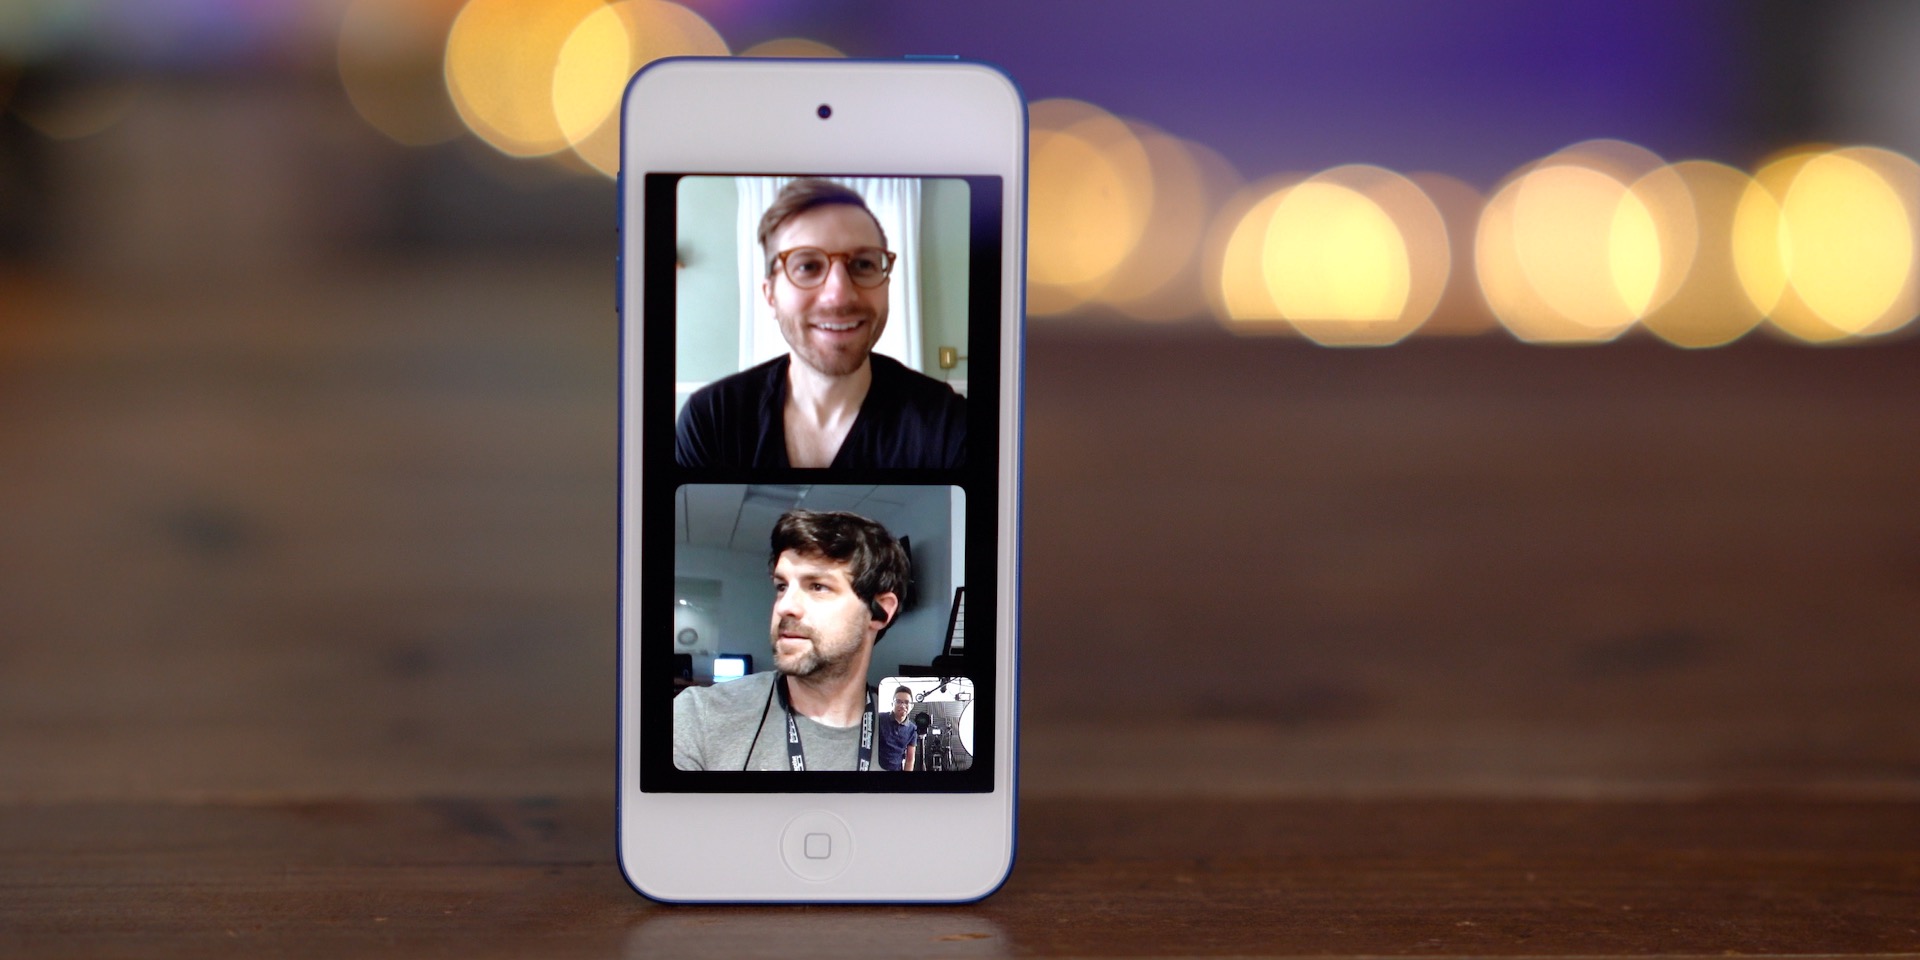 iPod touch 7 Group FaceTime